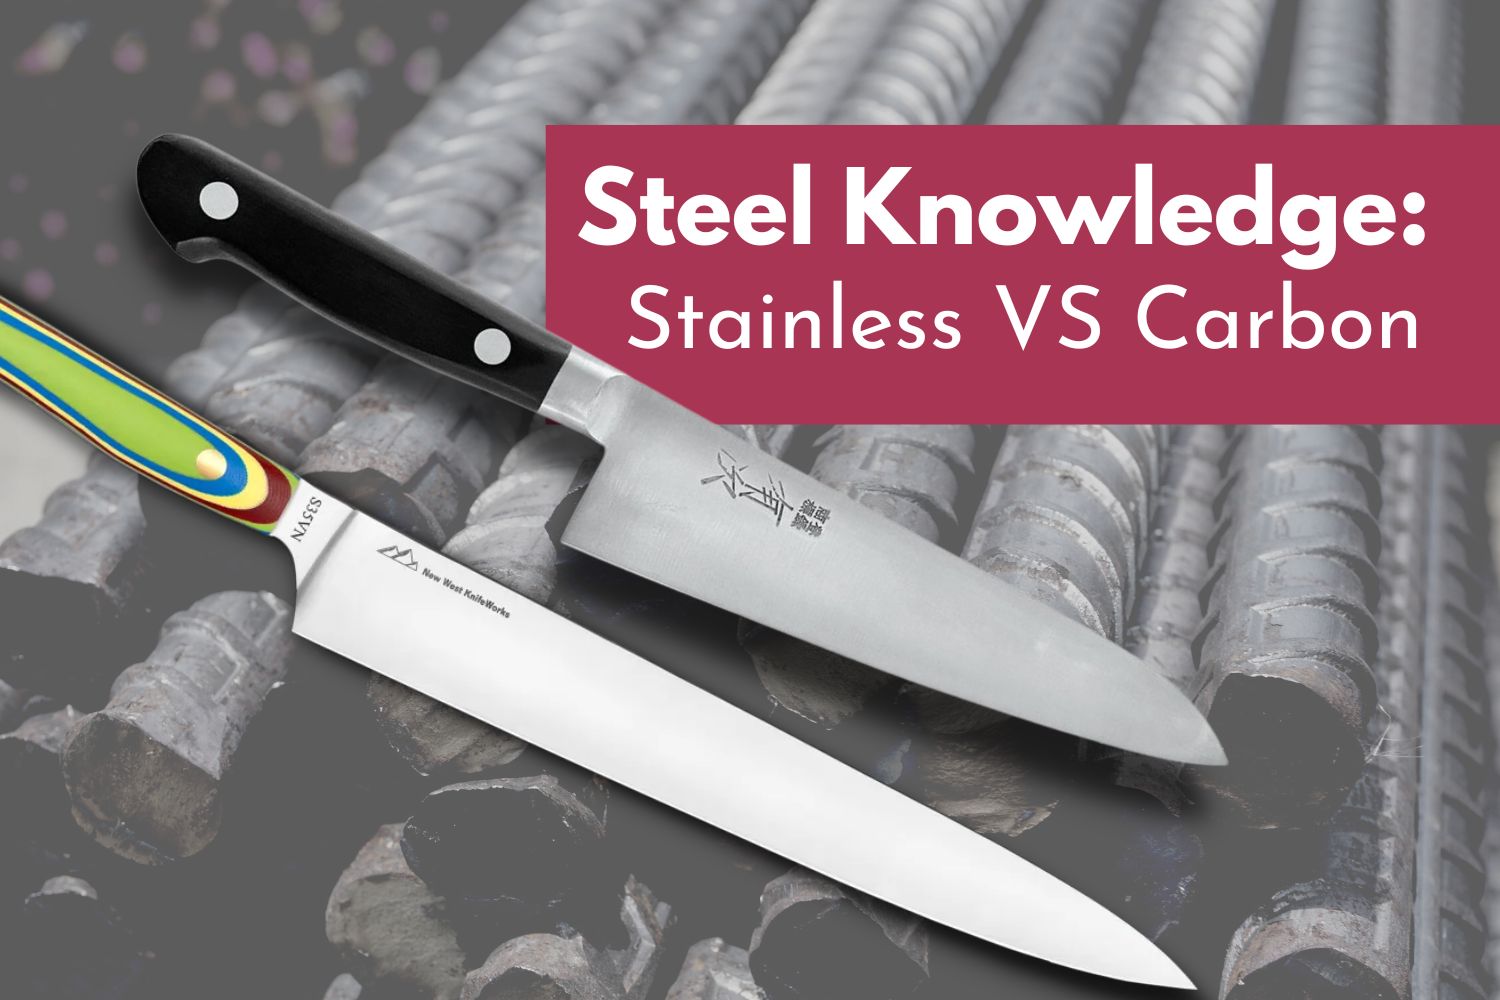 Stainless Steel Vs. Non-stainless Steel